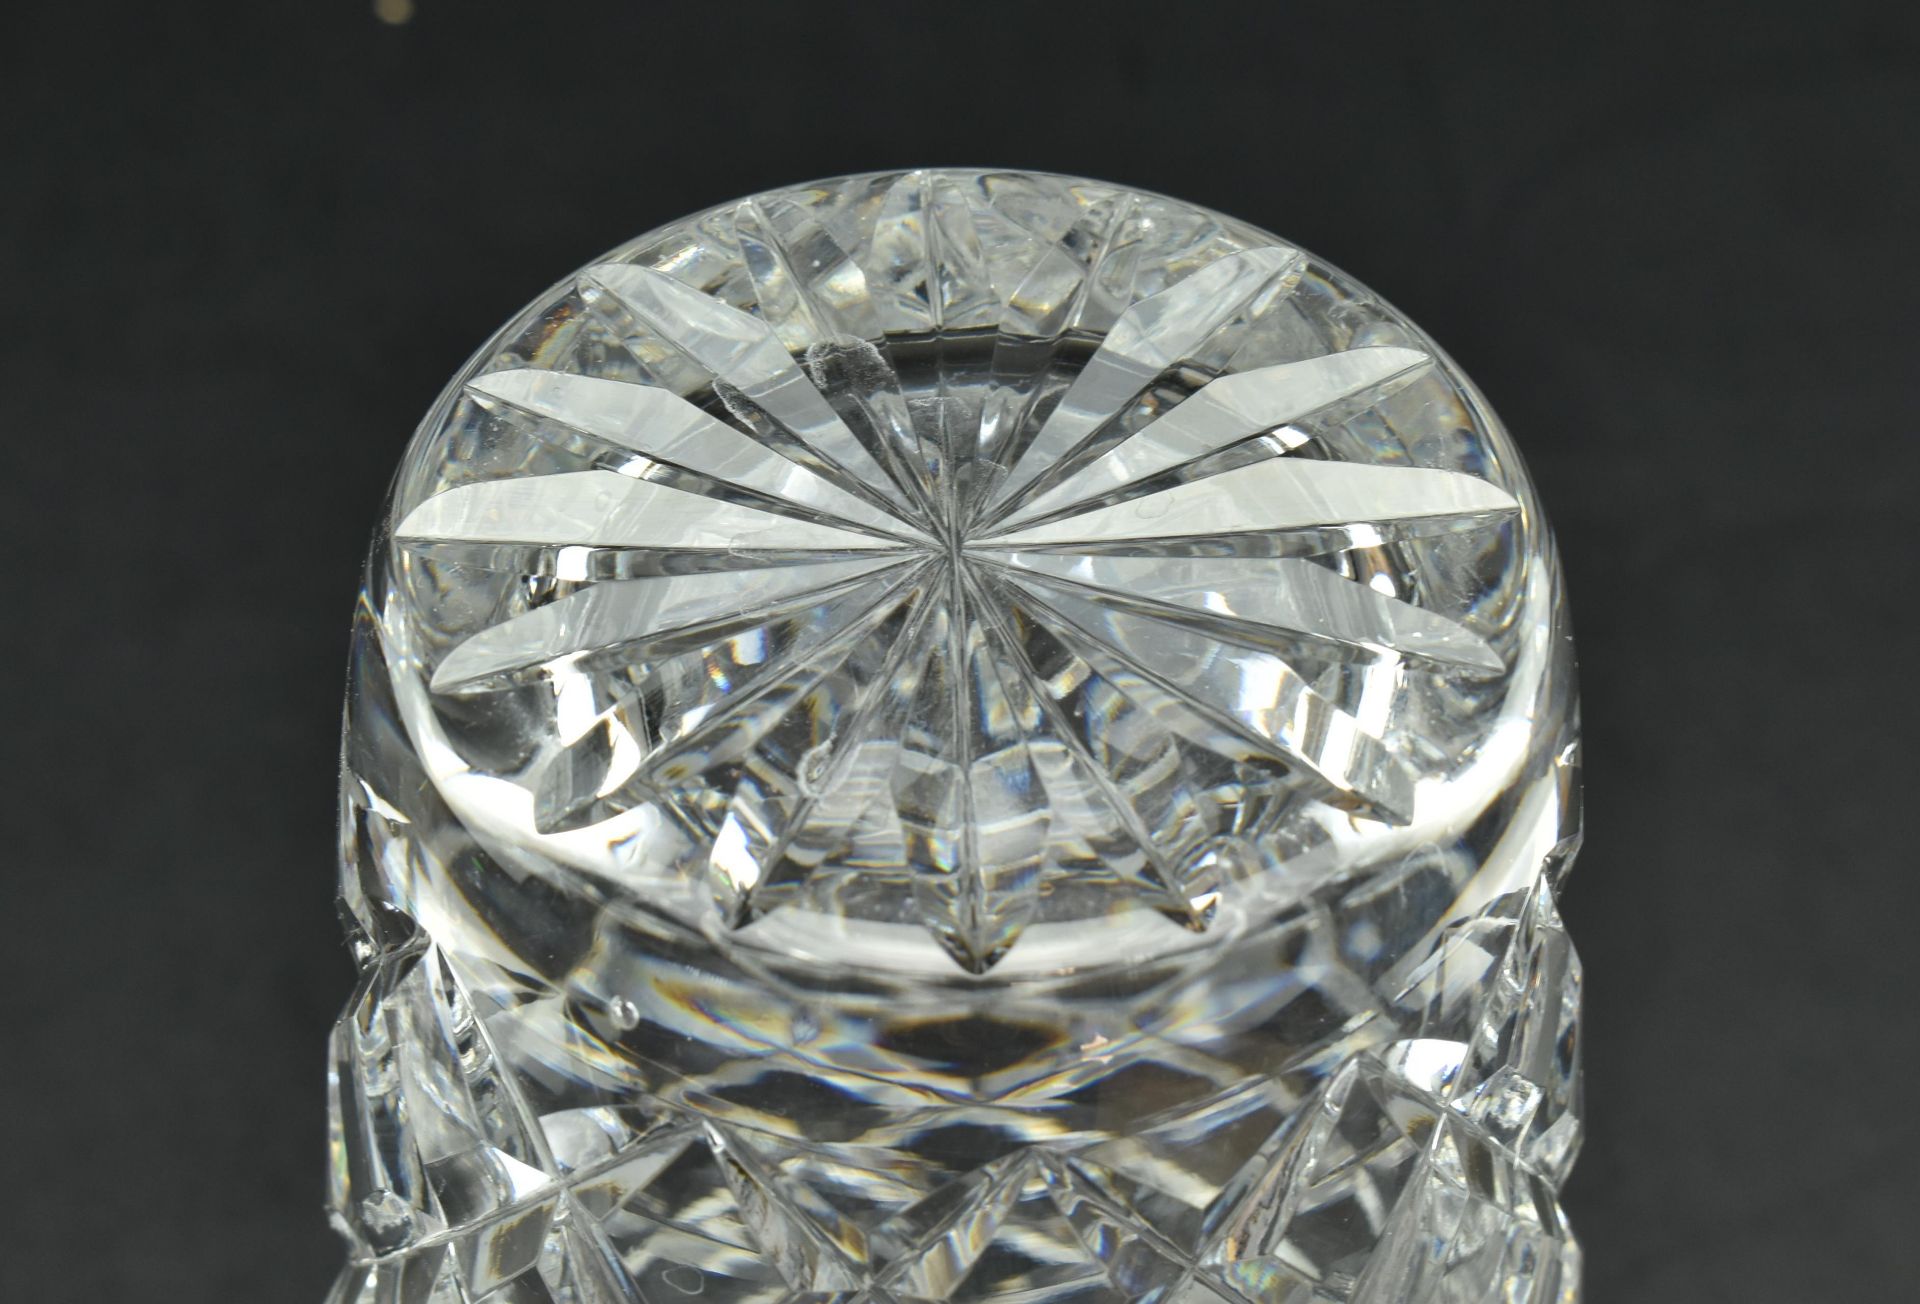 WATERFORD CRYSTAL GLASS COCKTAIL SHAKER - Image 6 of 8